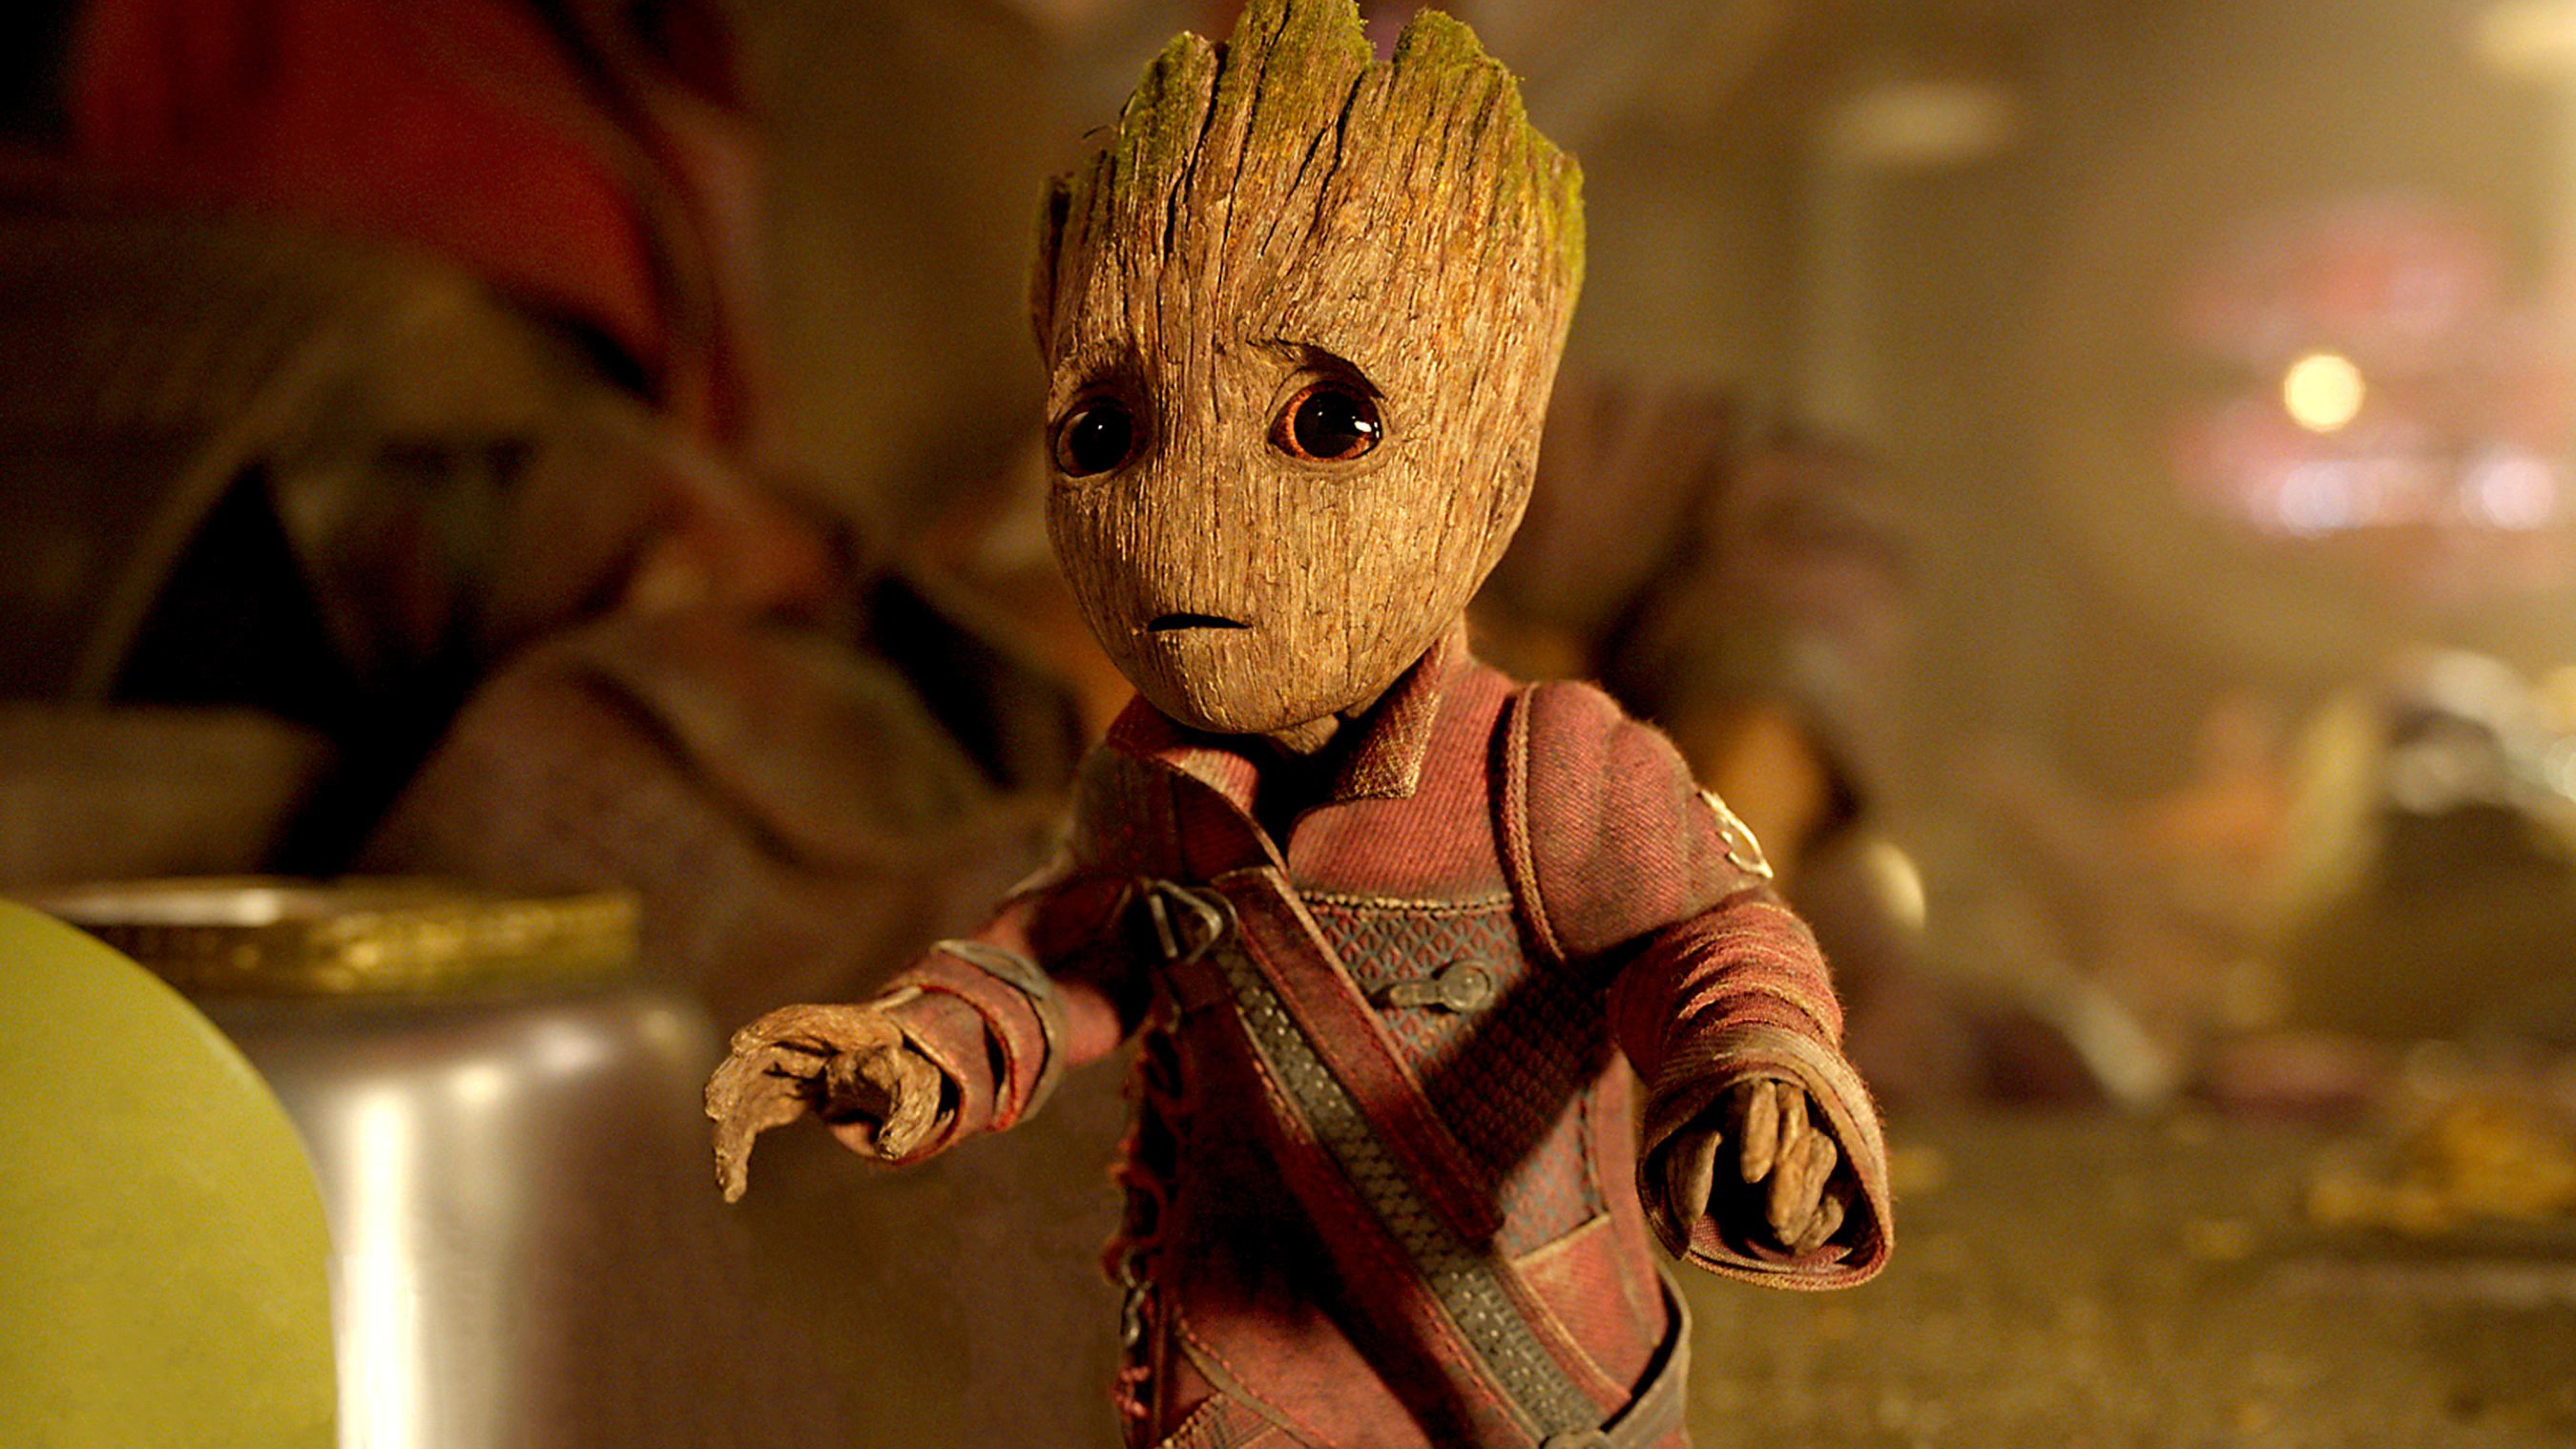 Baby Groot in Guardians Of The Galaxy Vol 2 8K Wallpaper, HD Movies 4K Wallpaper, Image, Photo and Background